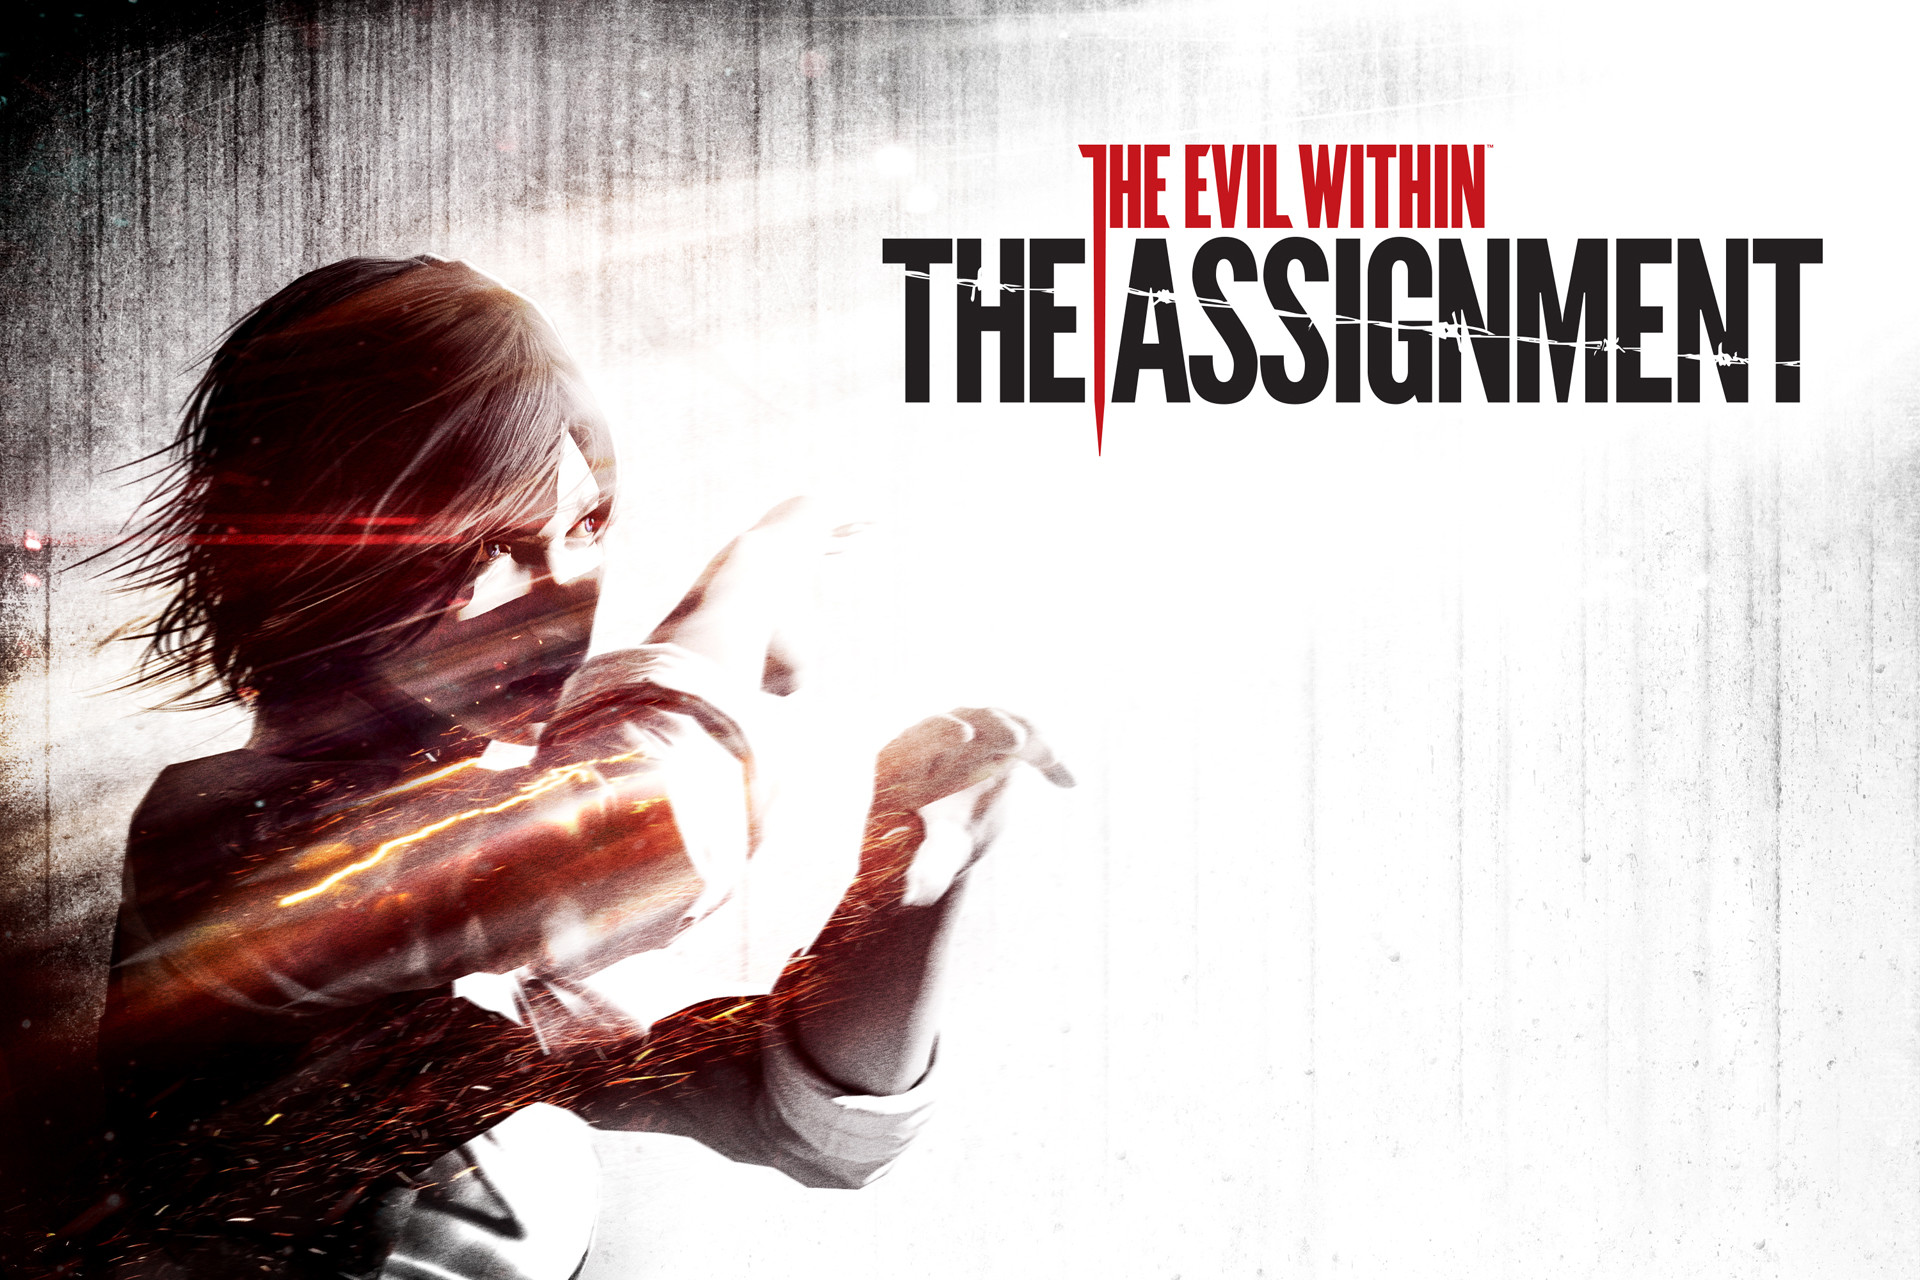 evil within assignment review